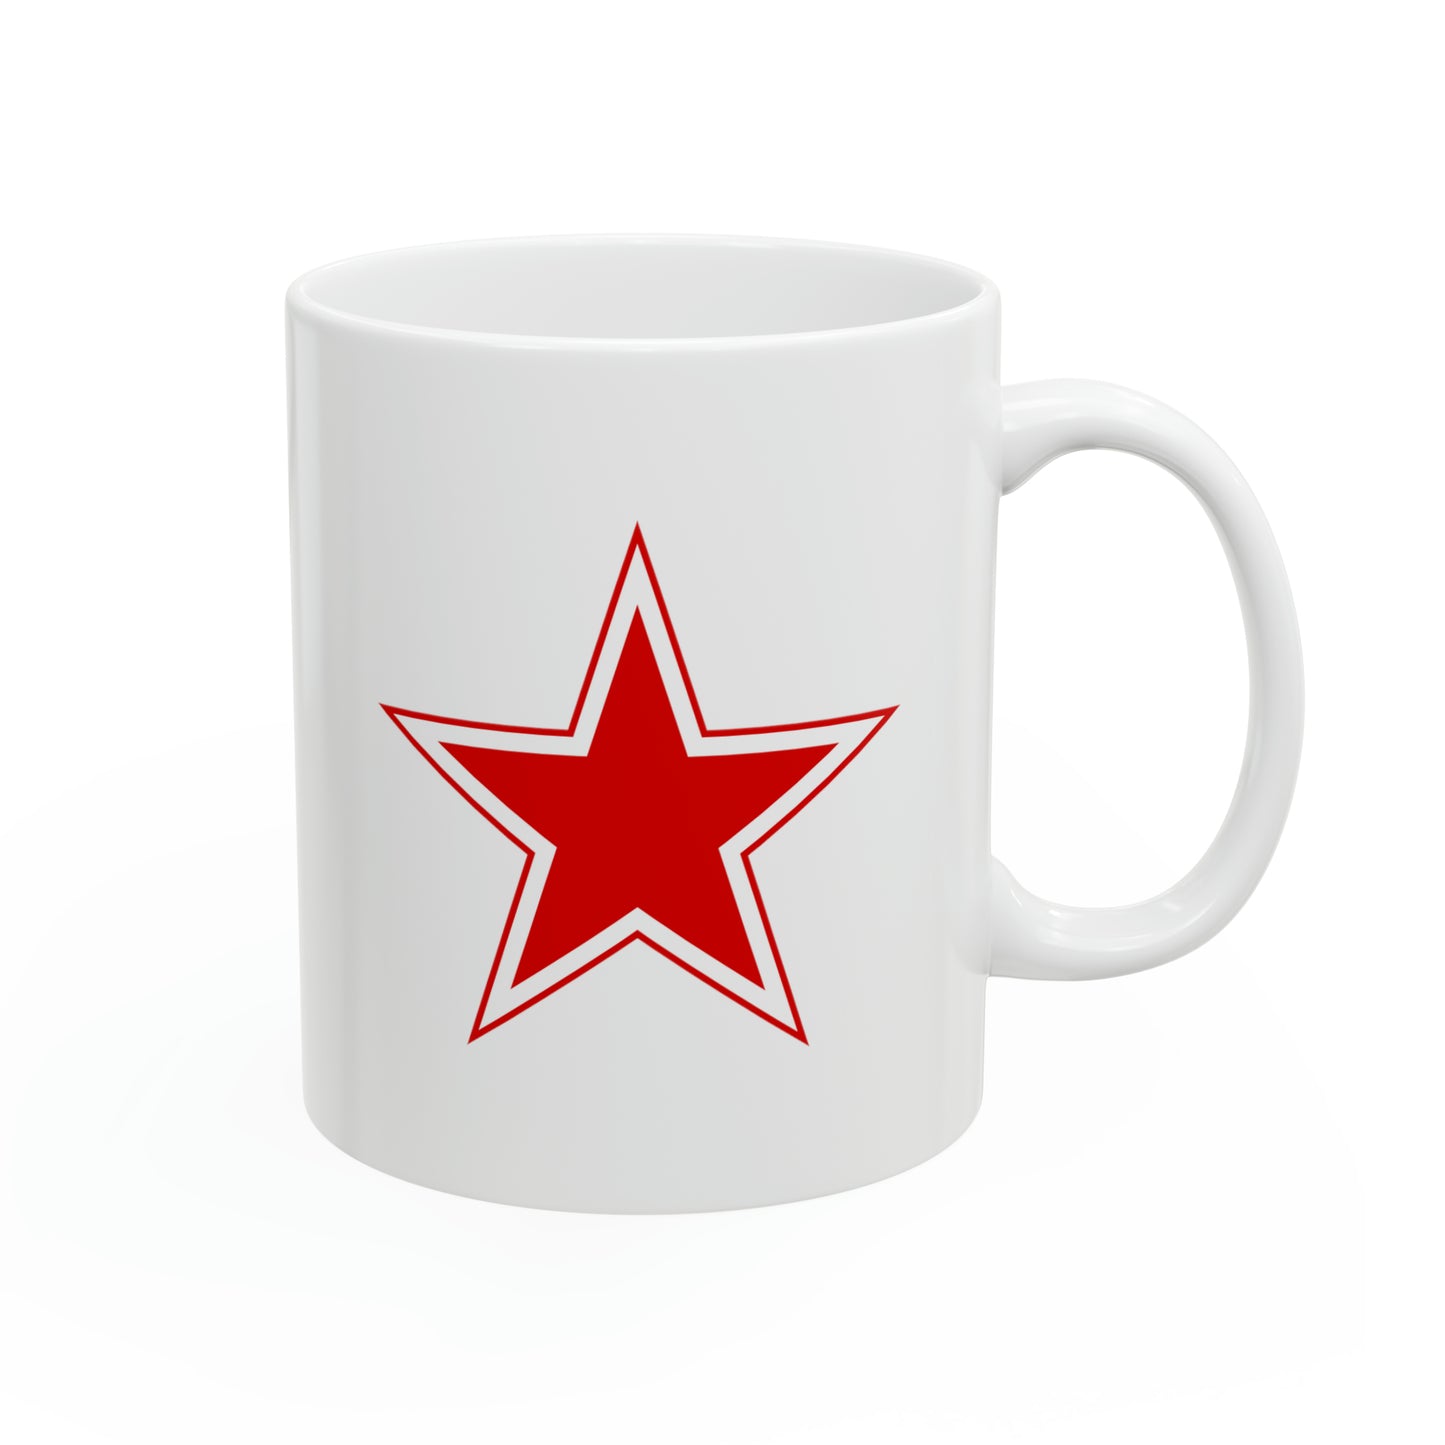 Russian Air Force Roundel Coffee Mug - Double Sided White Ceramic 11oz - By TheGlassyLass.com